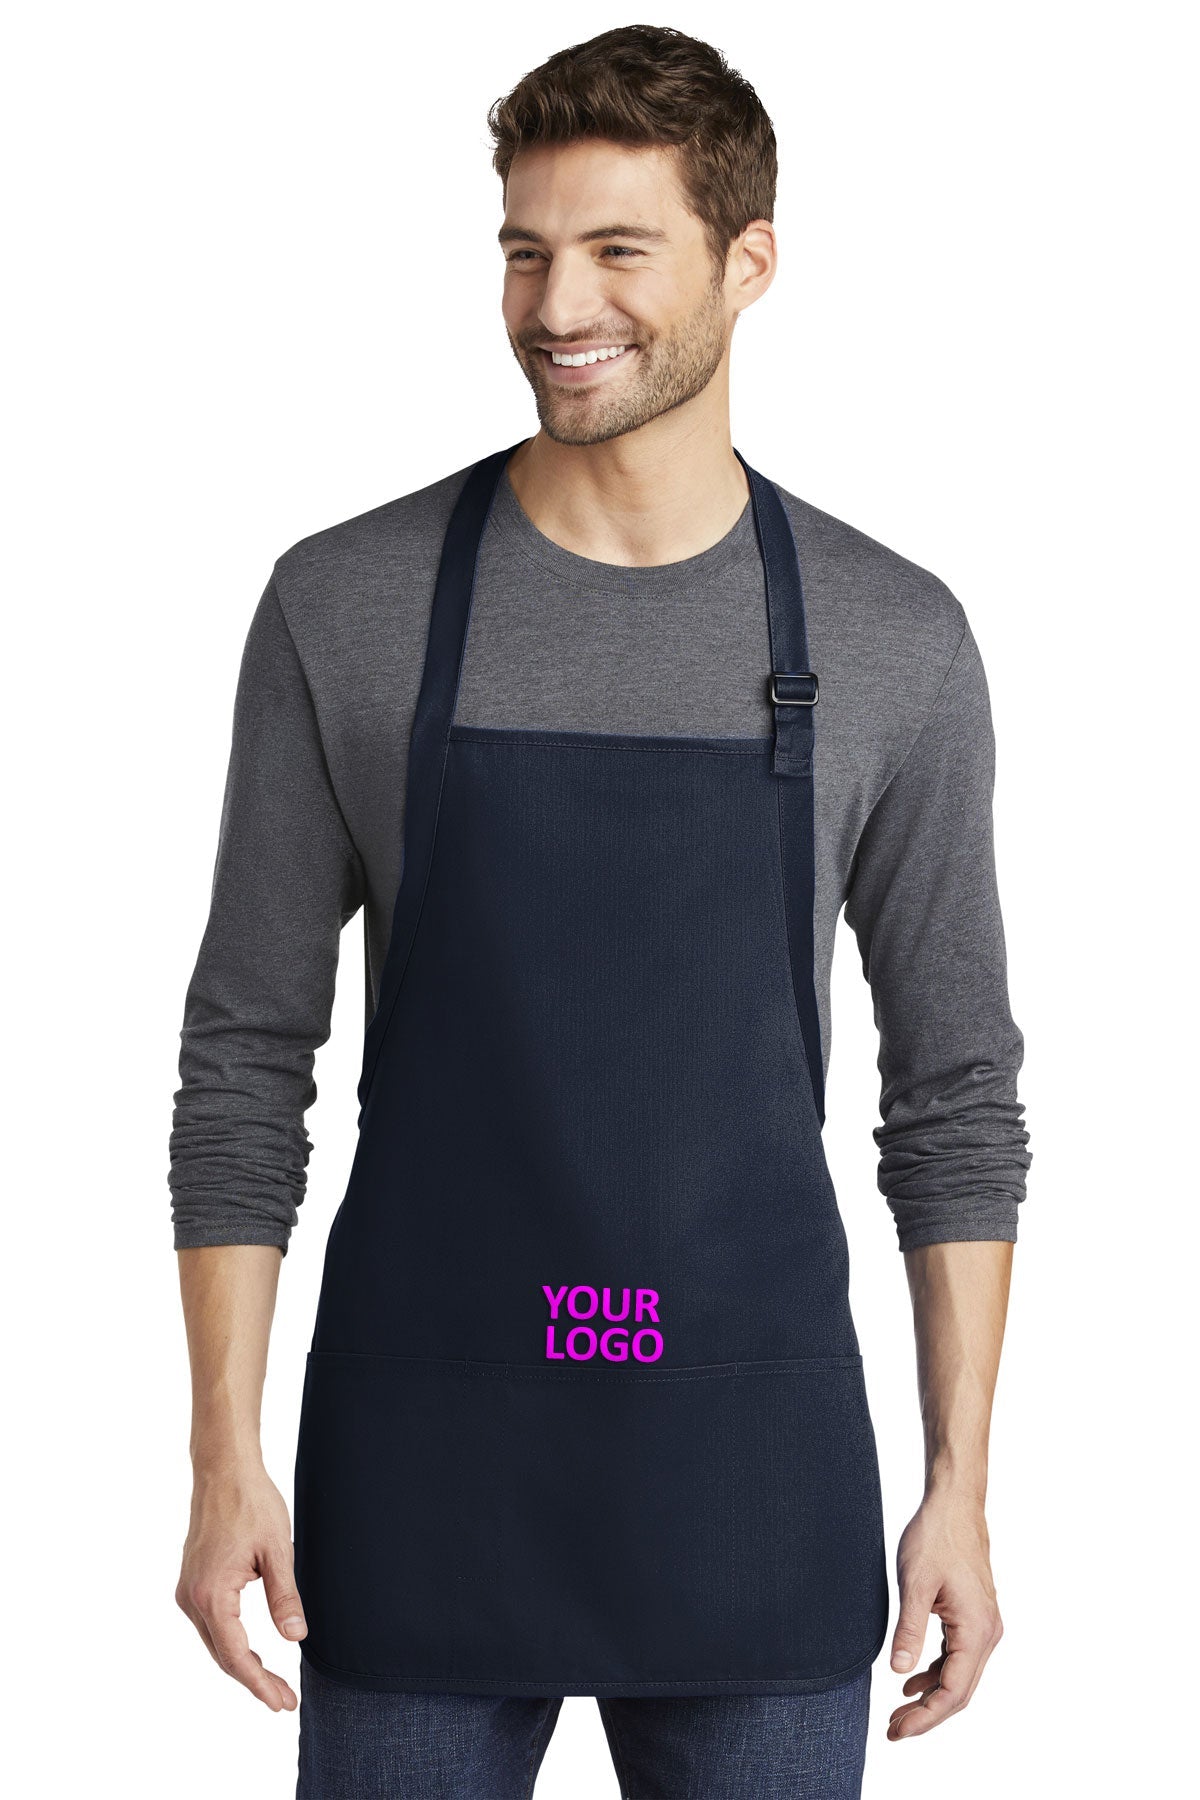 Port Authority Medium-Length Apron with Pouch Pockets A510 Navy